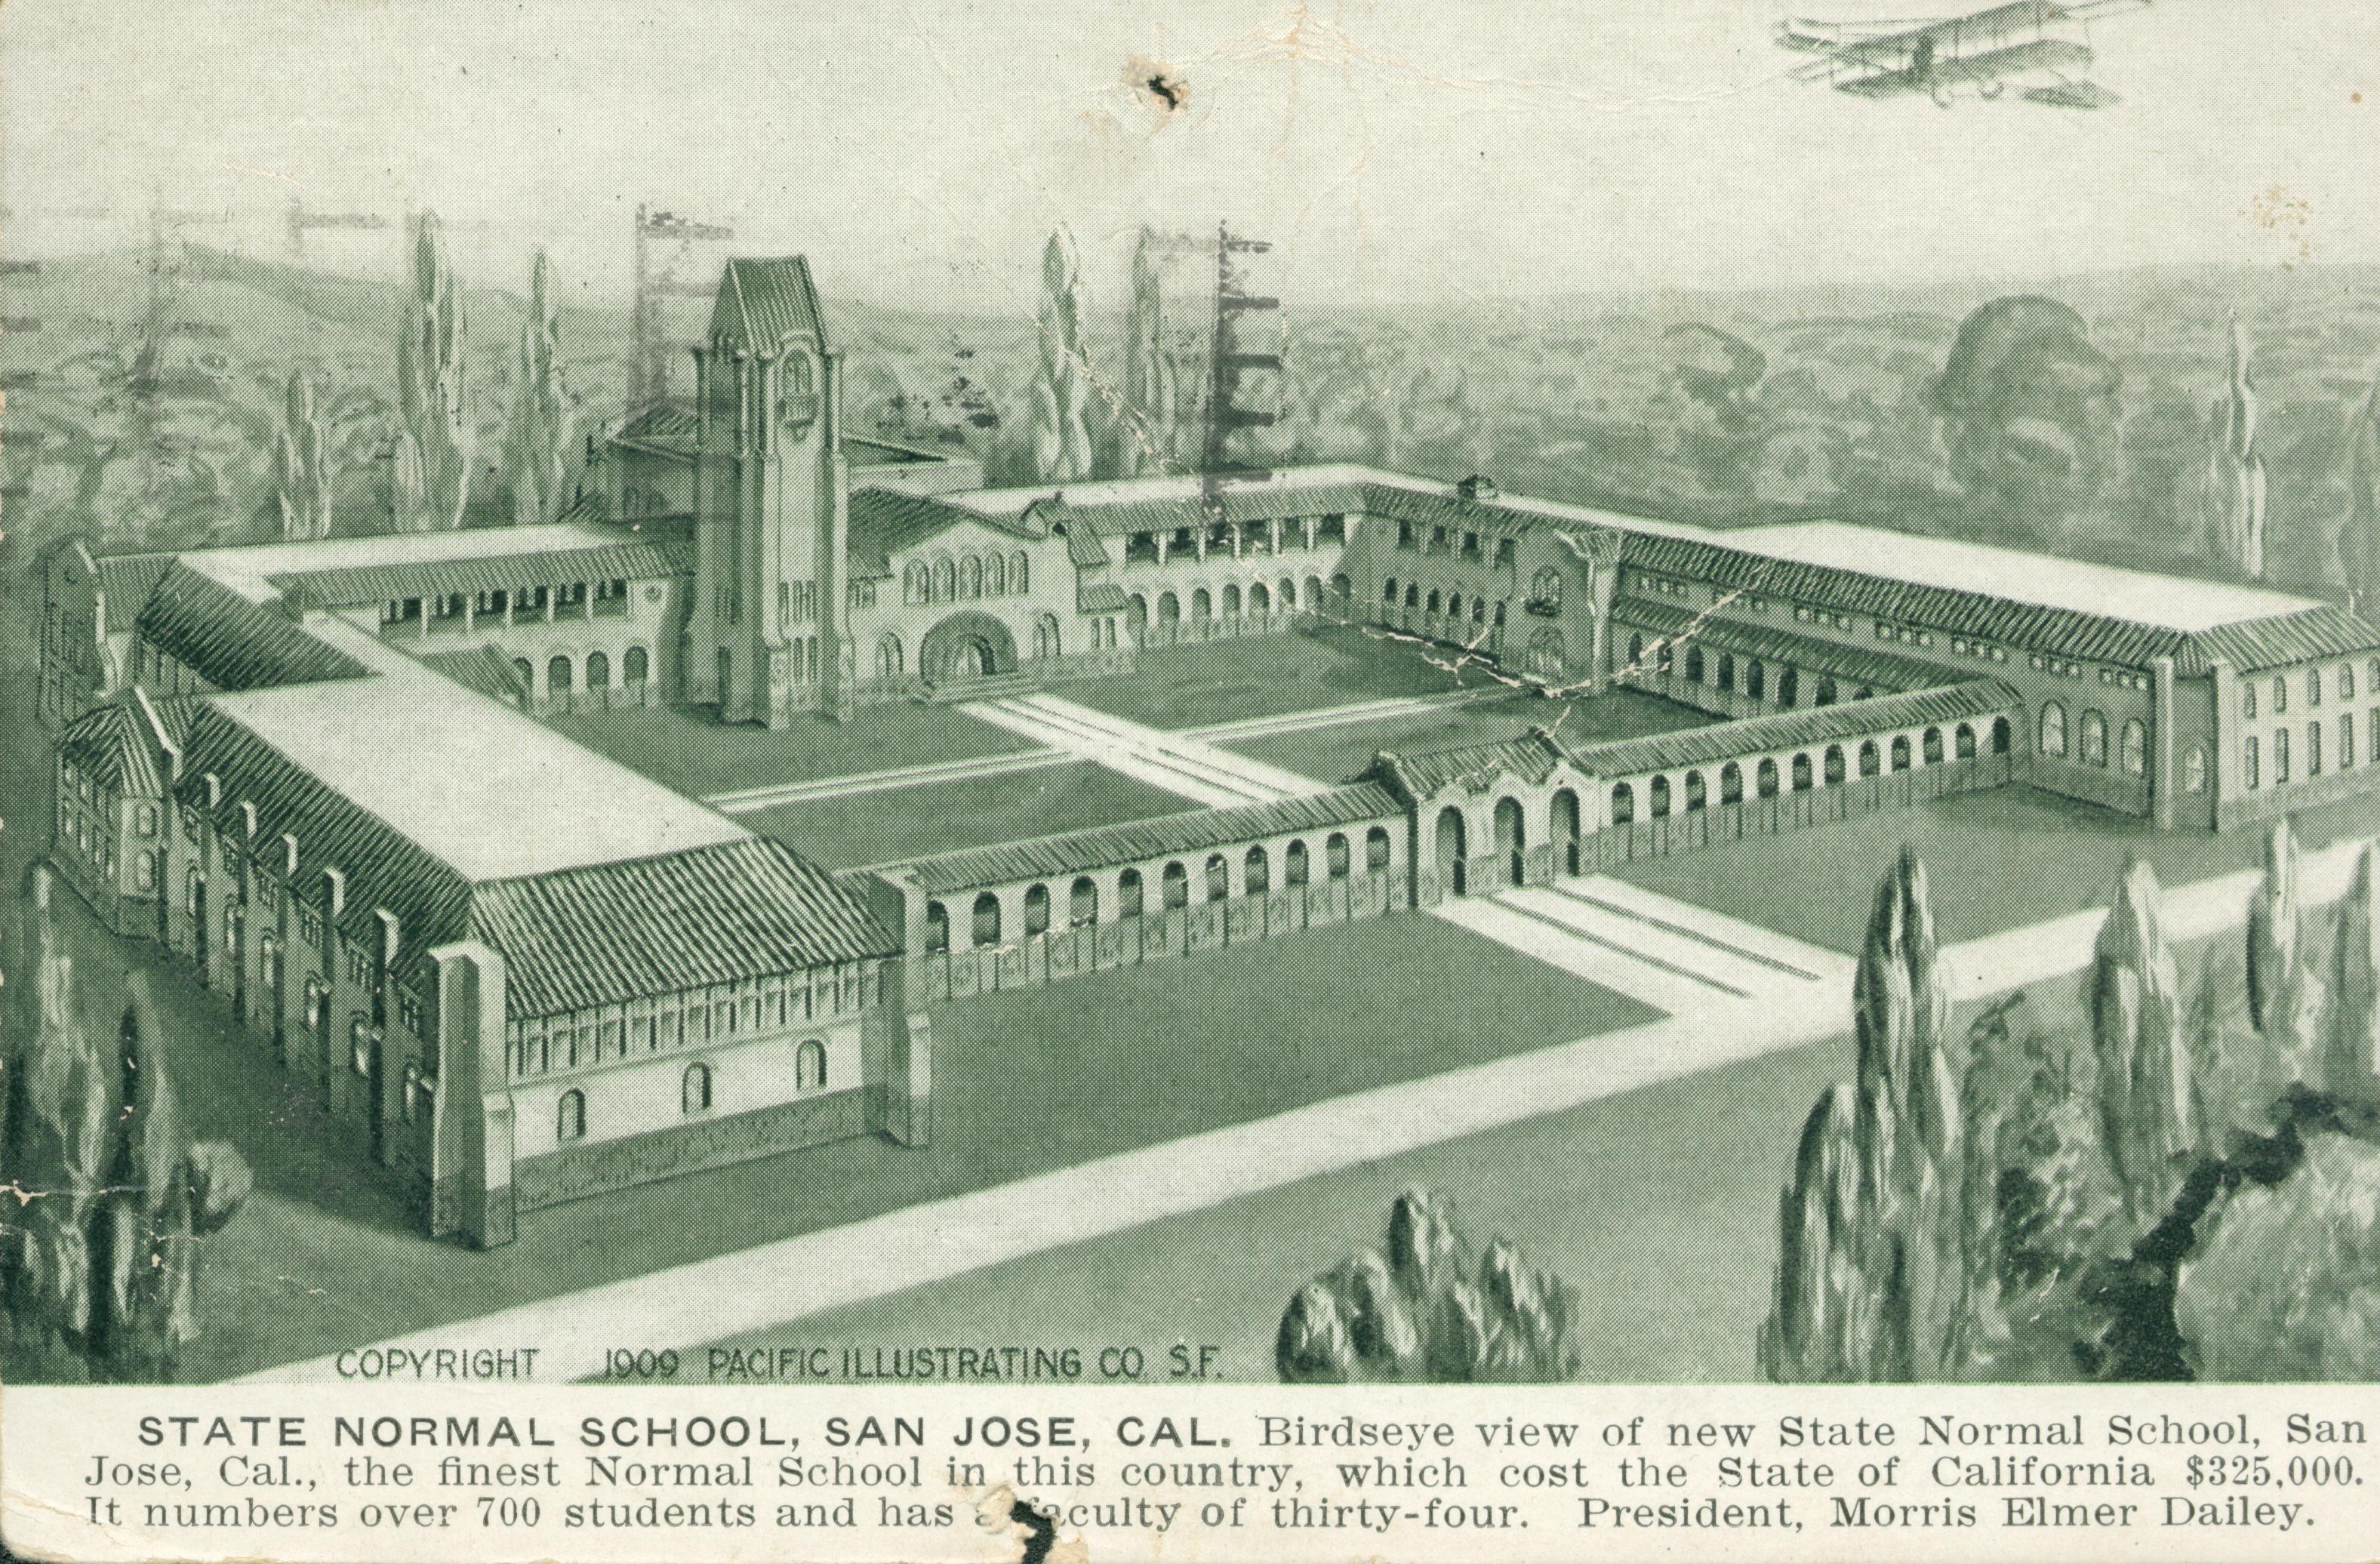 Shows the exterior of the State Normal School from above